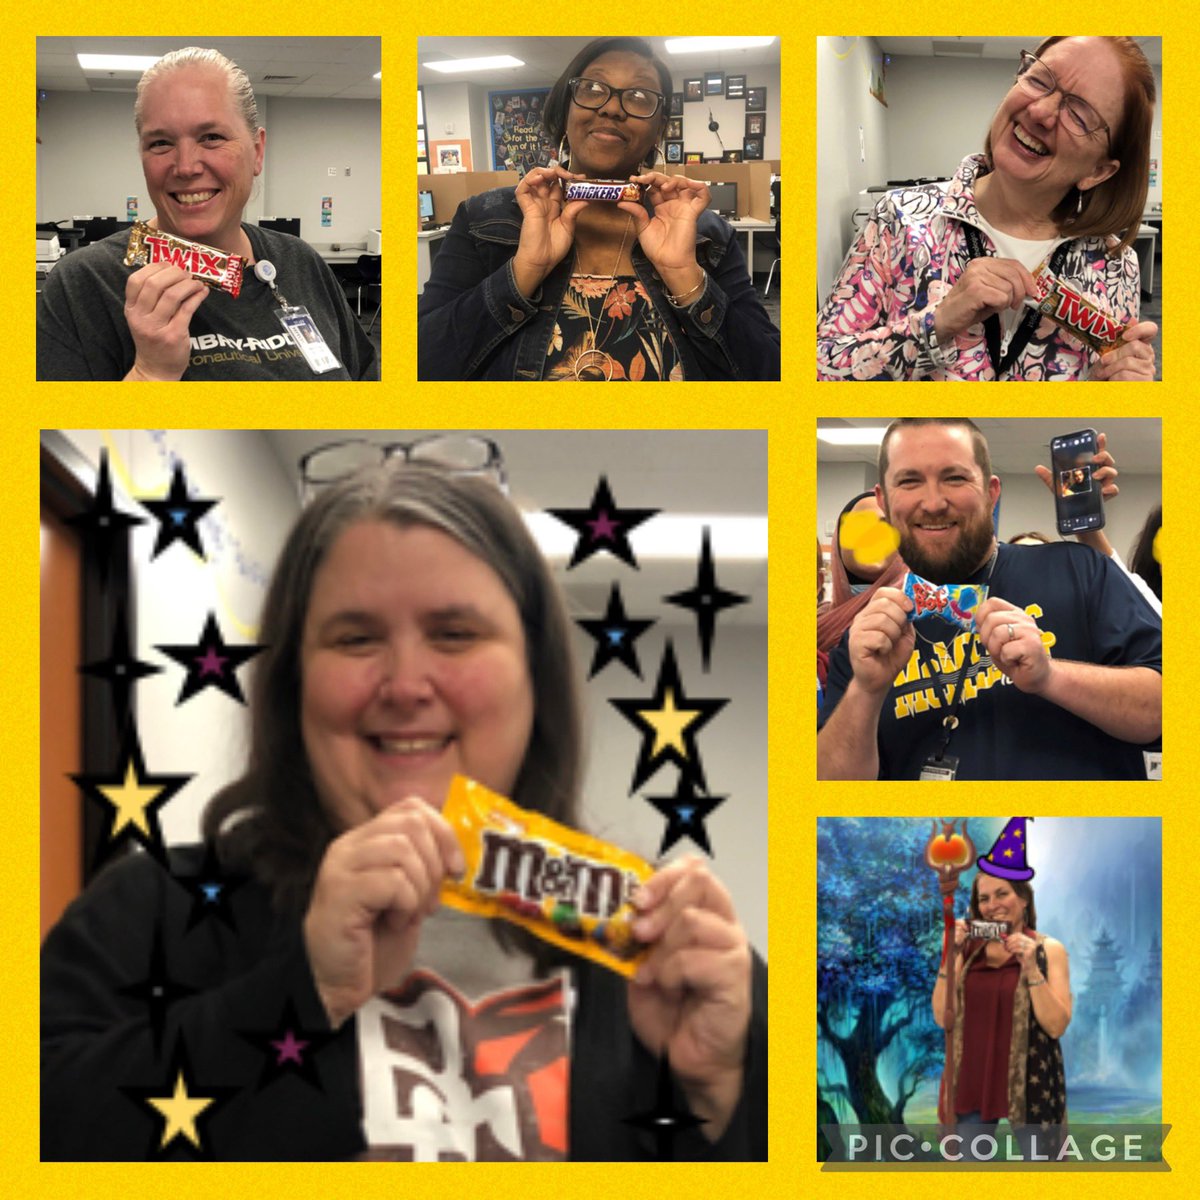 One way we reach out to our school community is getting our @mc_mcmeans staff involved in our activities! Here are some lucky Wordle winners! #NationalLibraryOutreachDay @katy_libraries #katylibraries